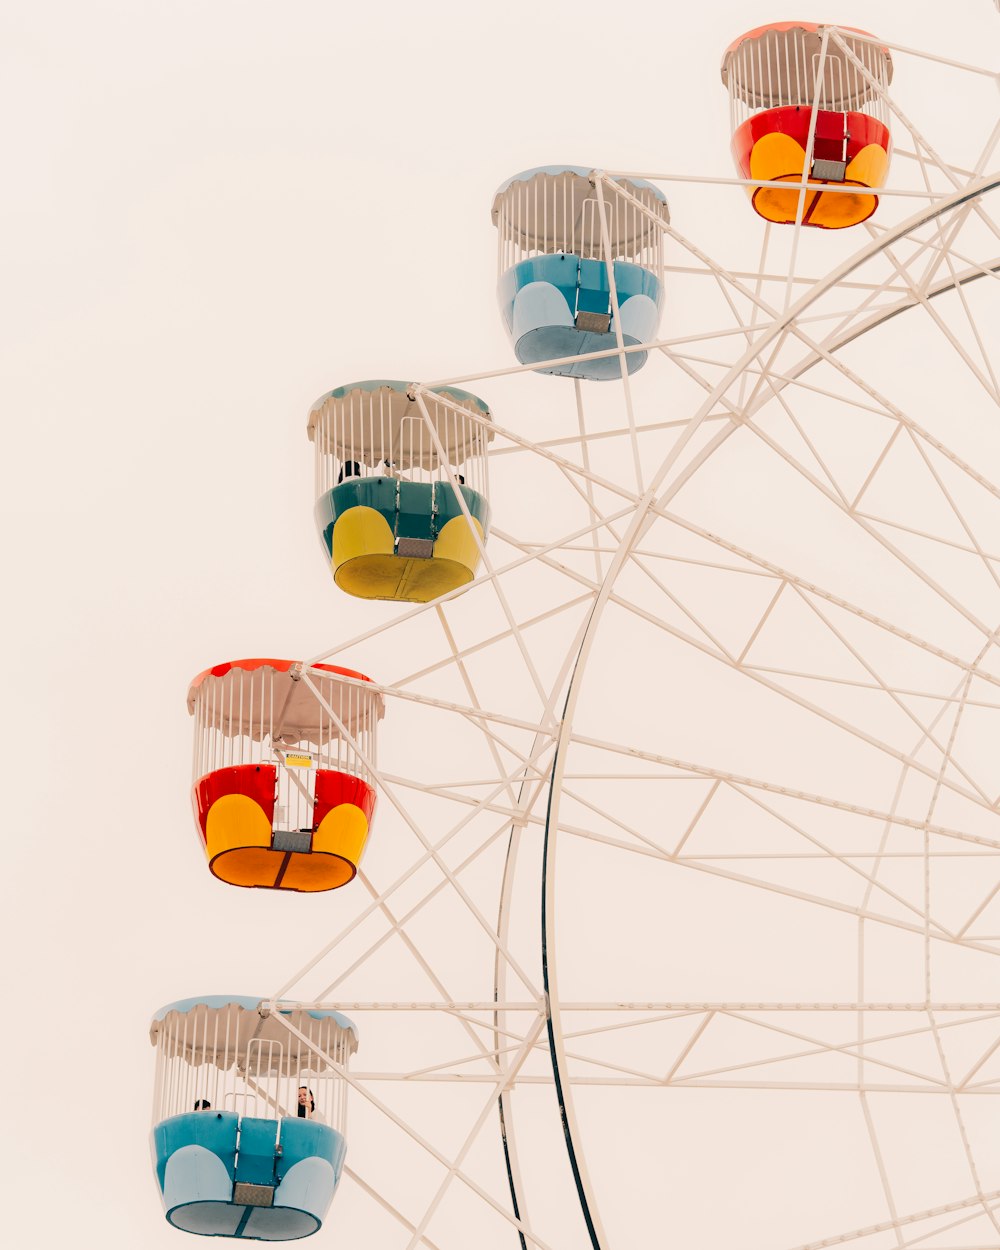 a ferris wheel with colorful seats on top of it